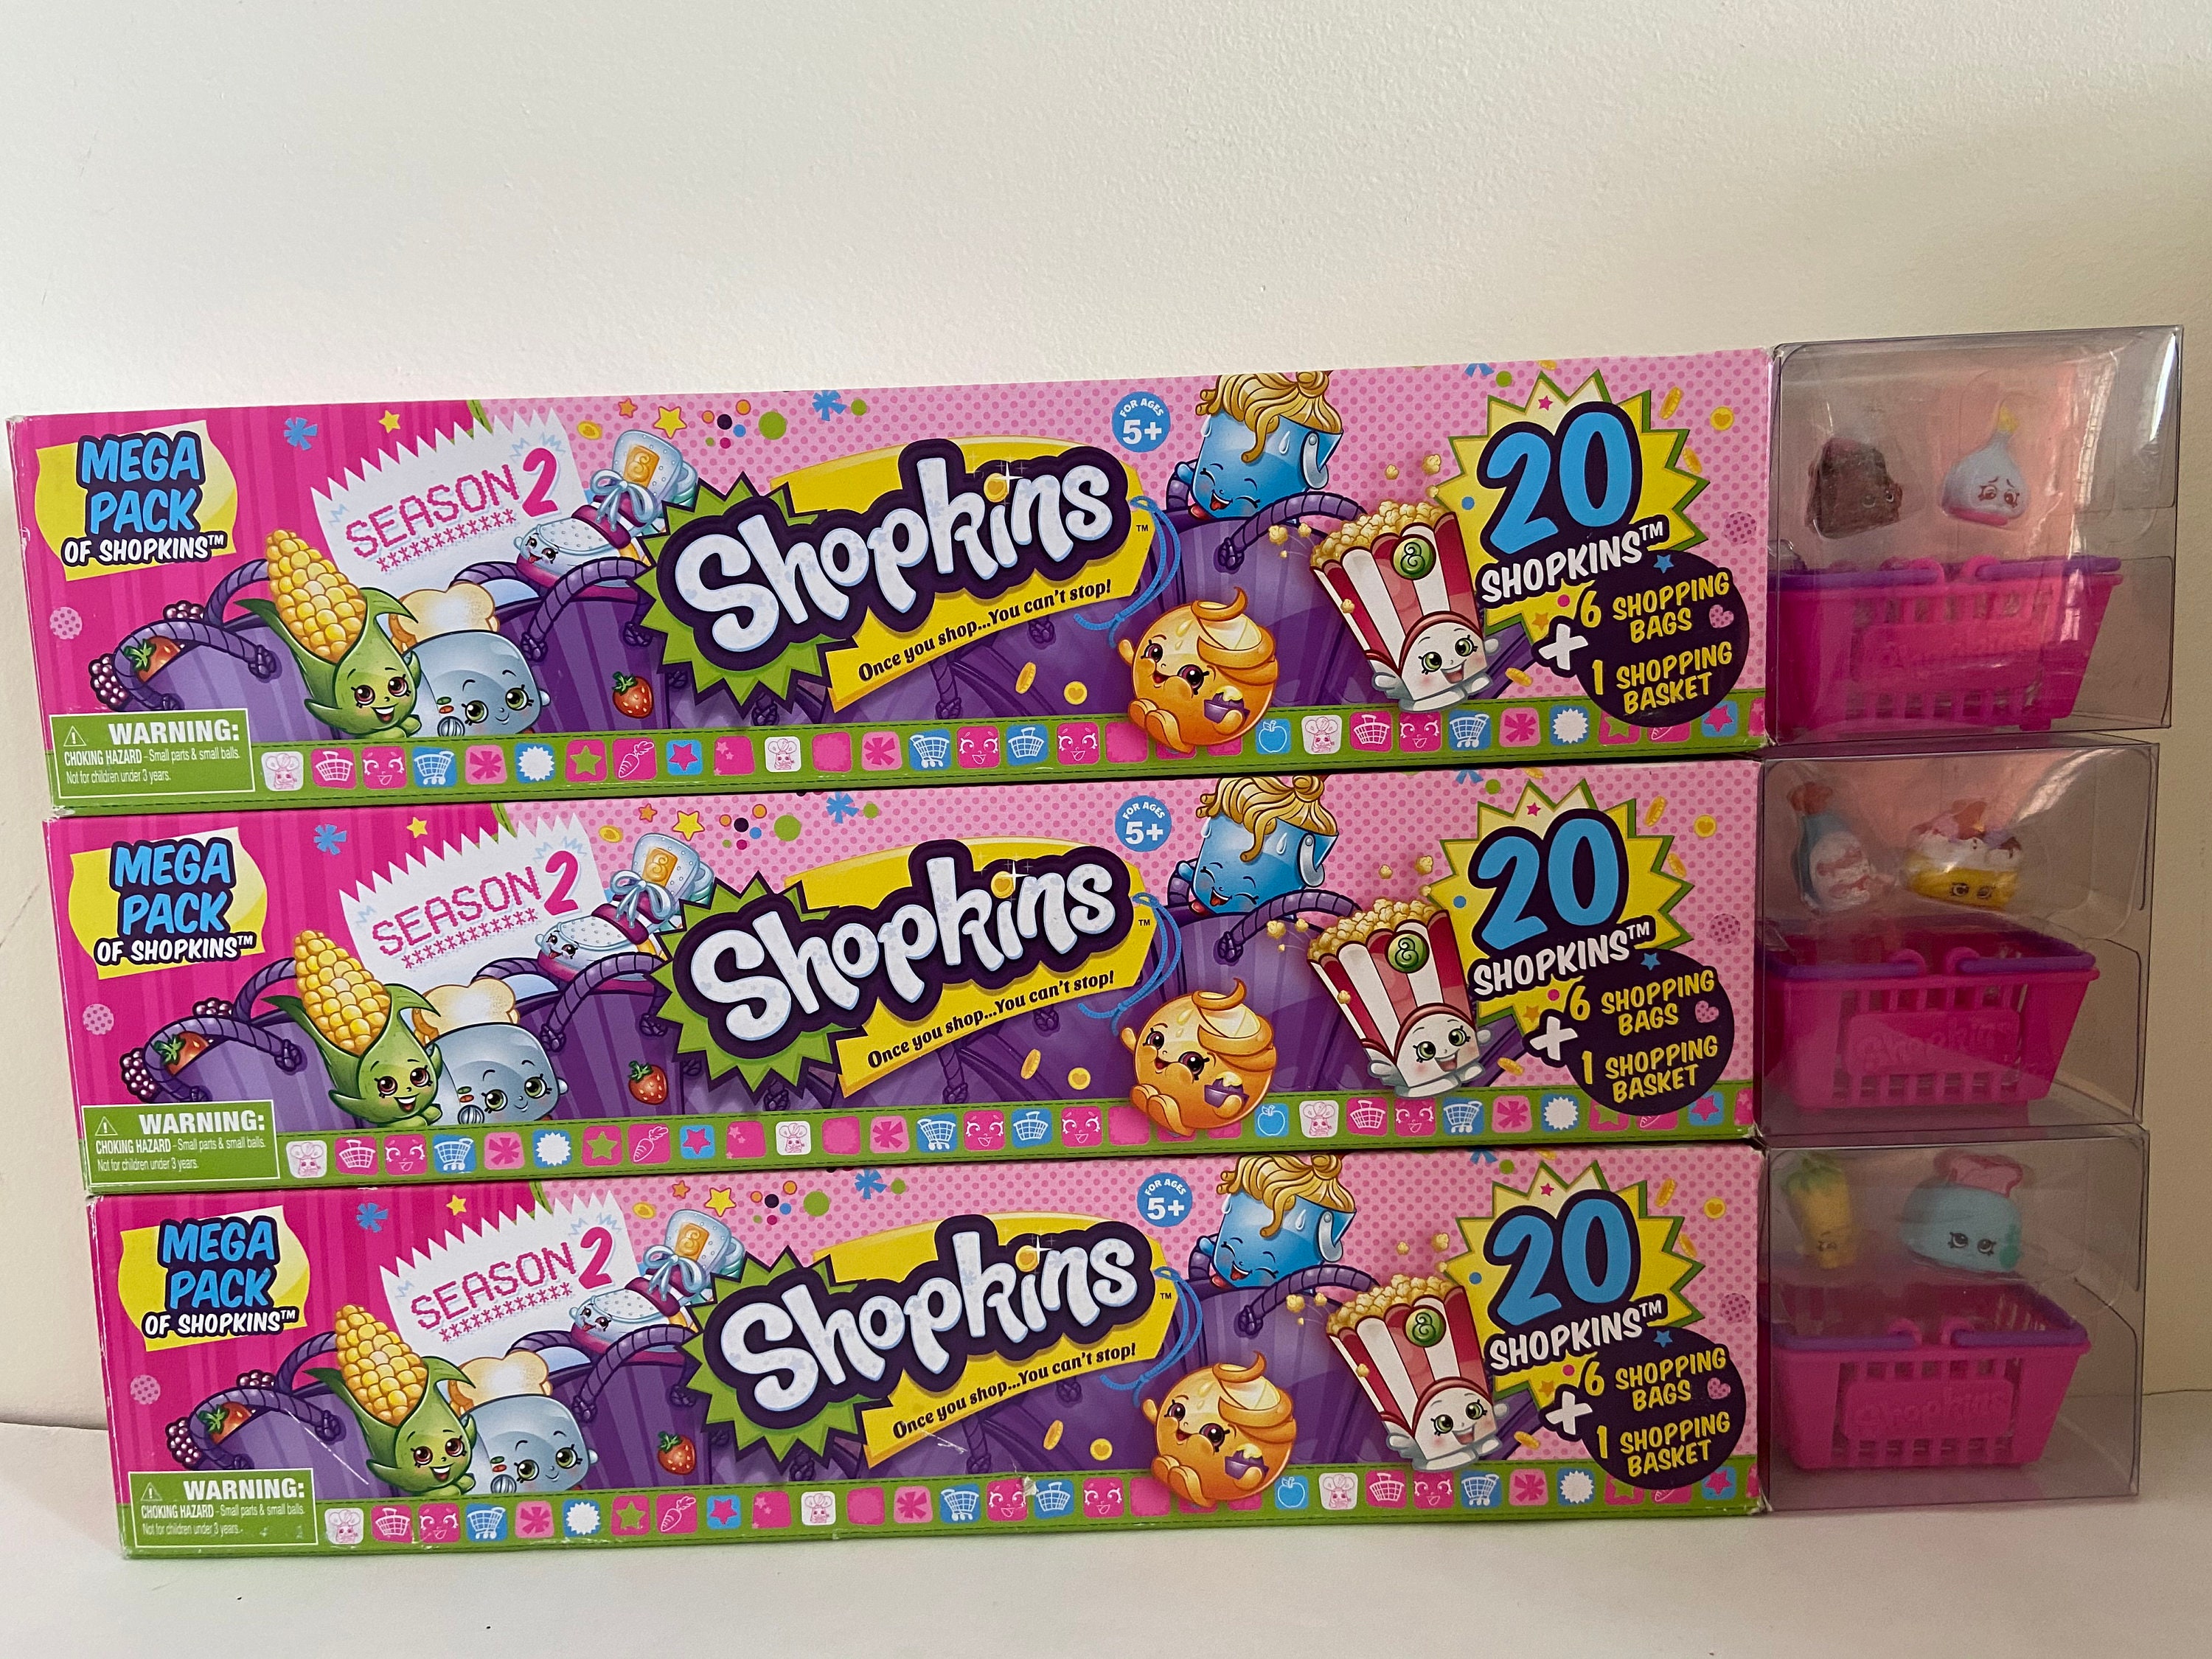 Shopkins Real Littles Icy Treats - Collector Case Wholesale